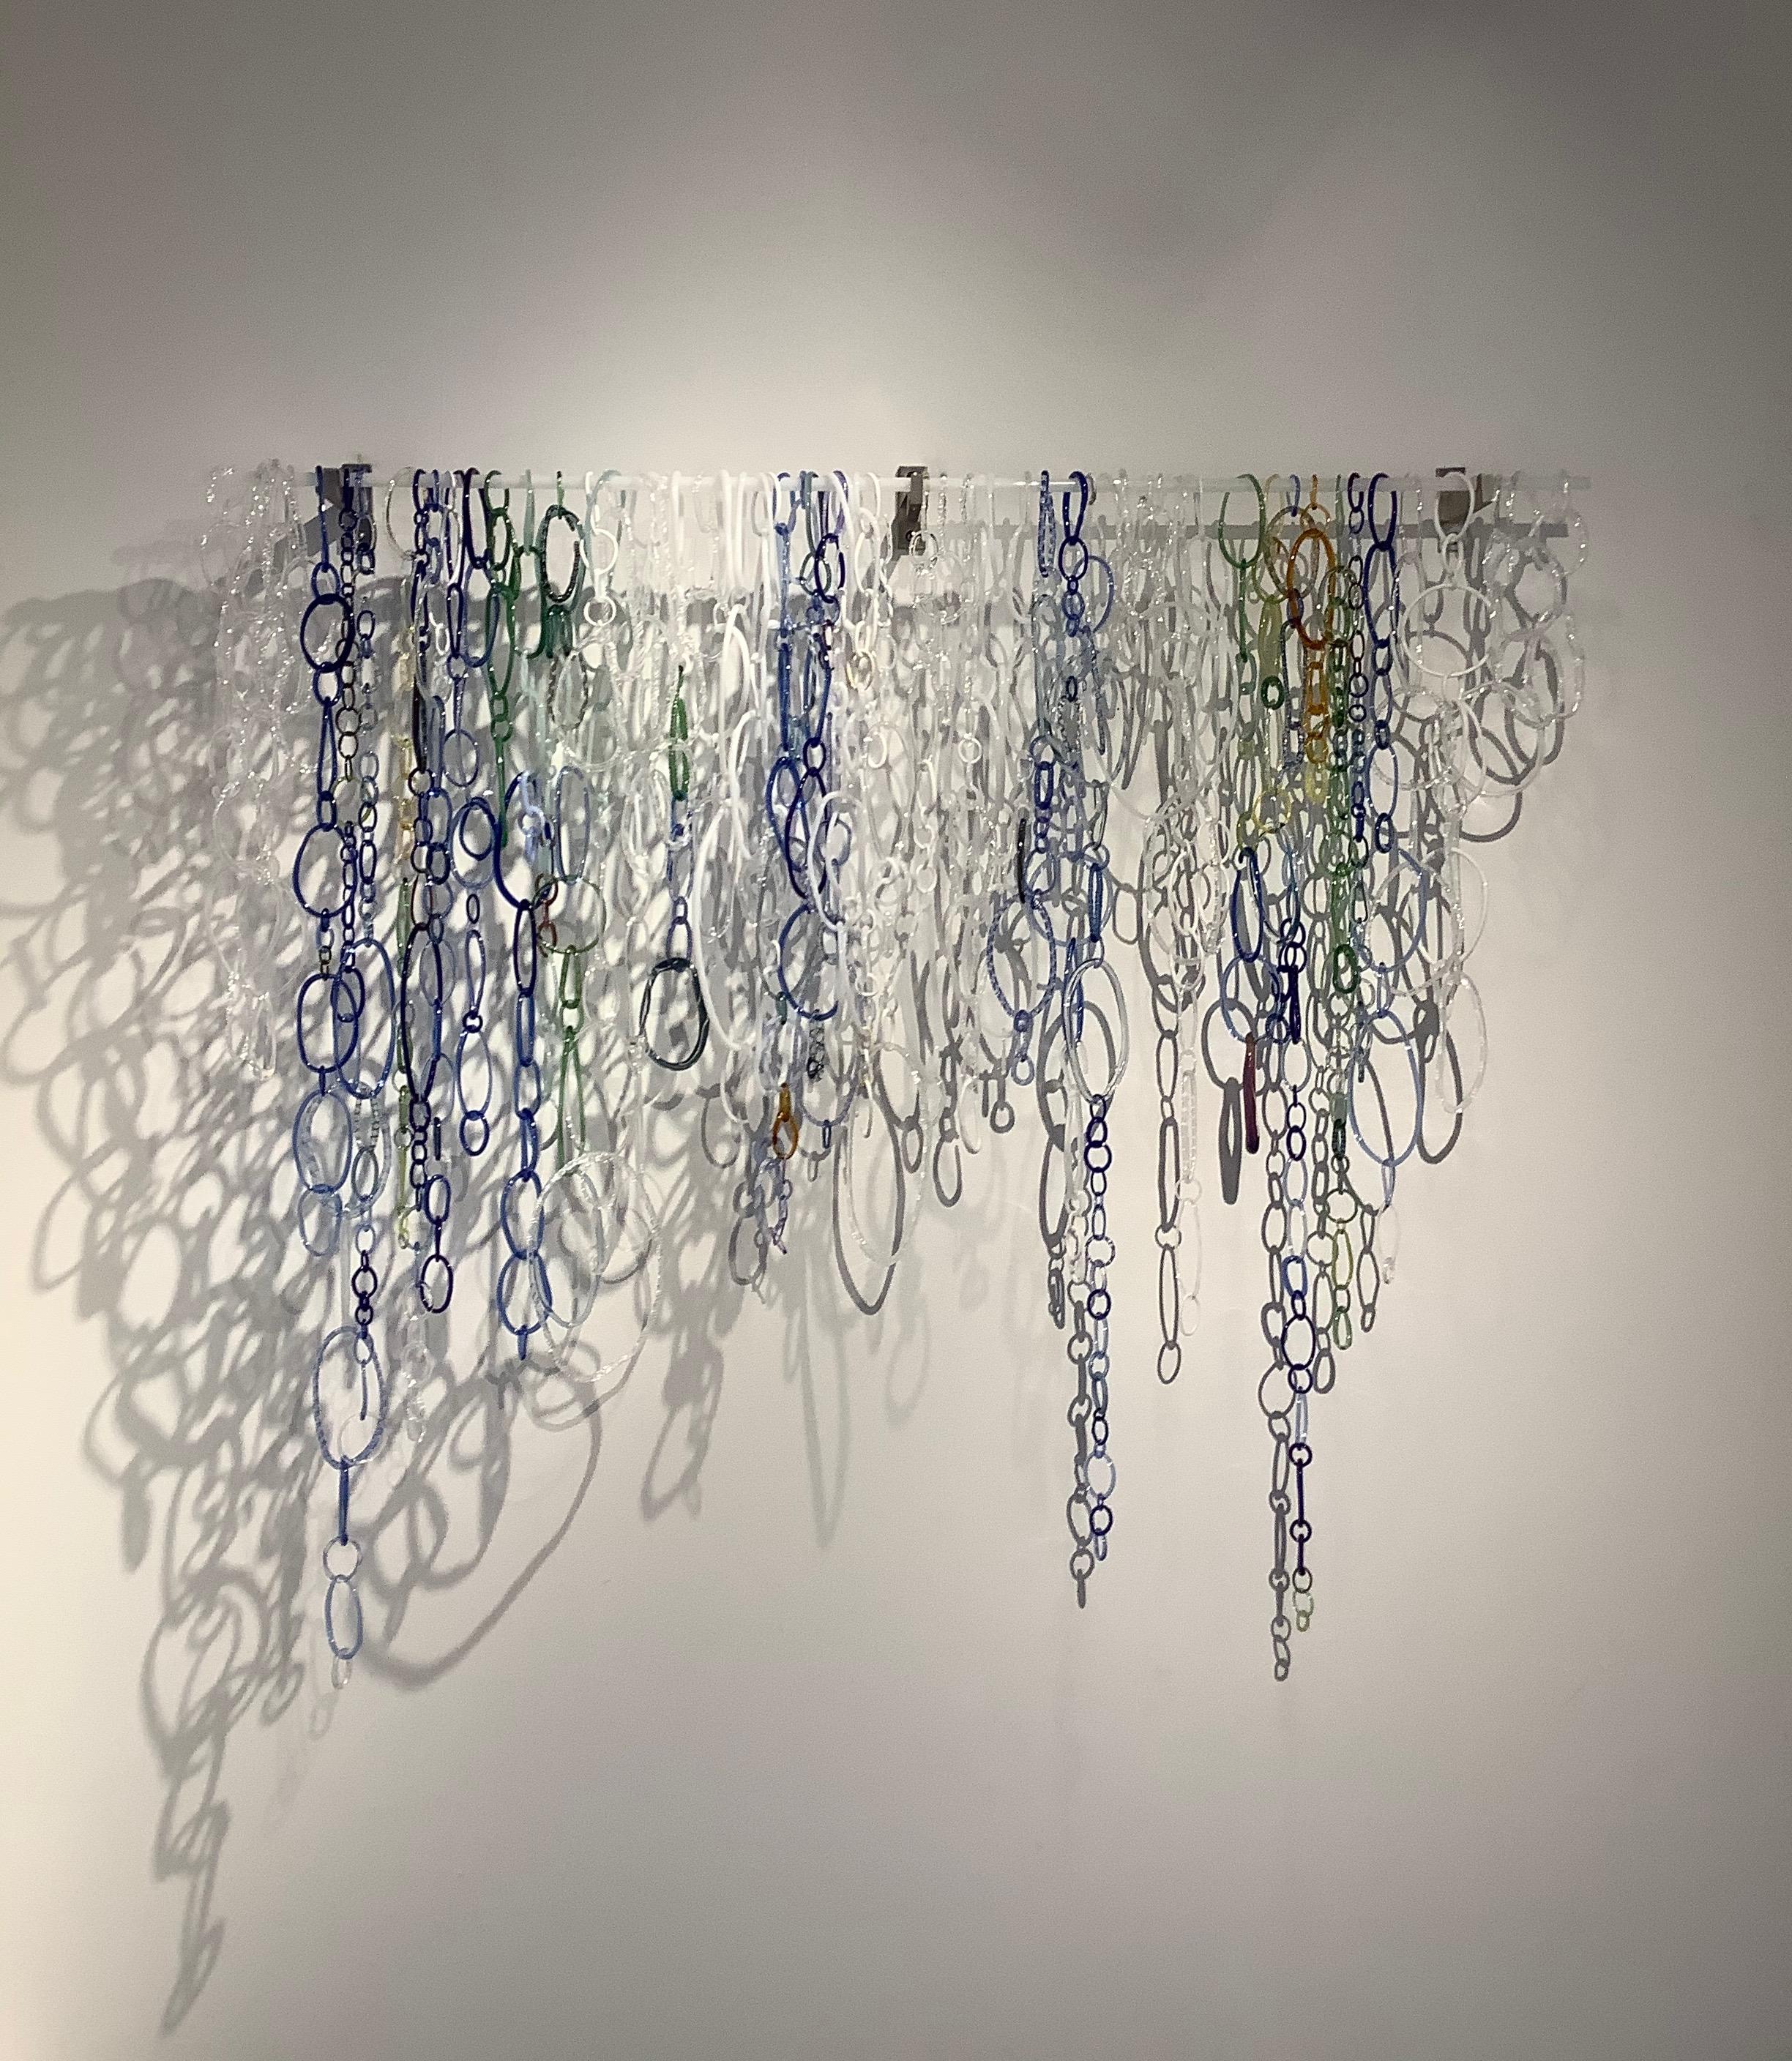 David Licata Abstract Sculpture - Frozen II, Hanging Sculpture of Torch-Worked Glass in White, Blue, Green Loops